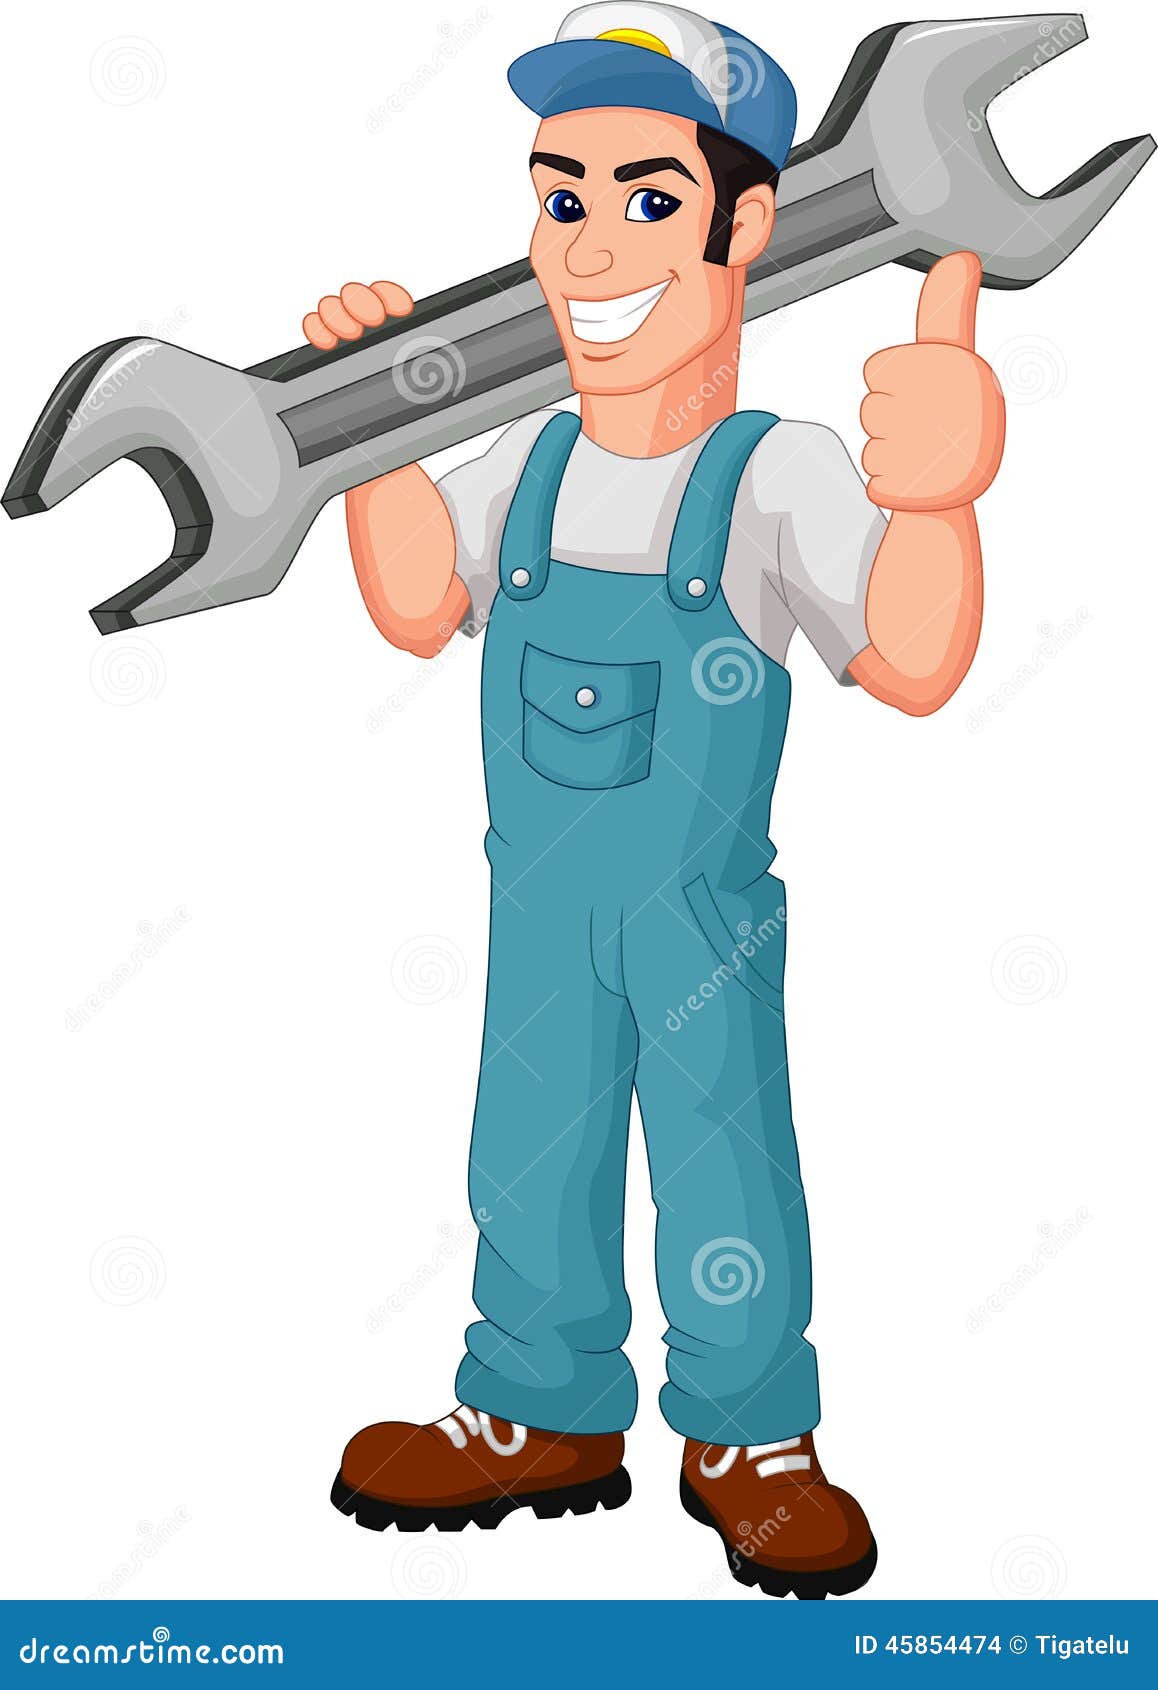 Funny Mechanic Cartoon Holding Wrench And Giving Thumbs Up Illustration  45854474 - Megapixl